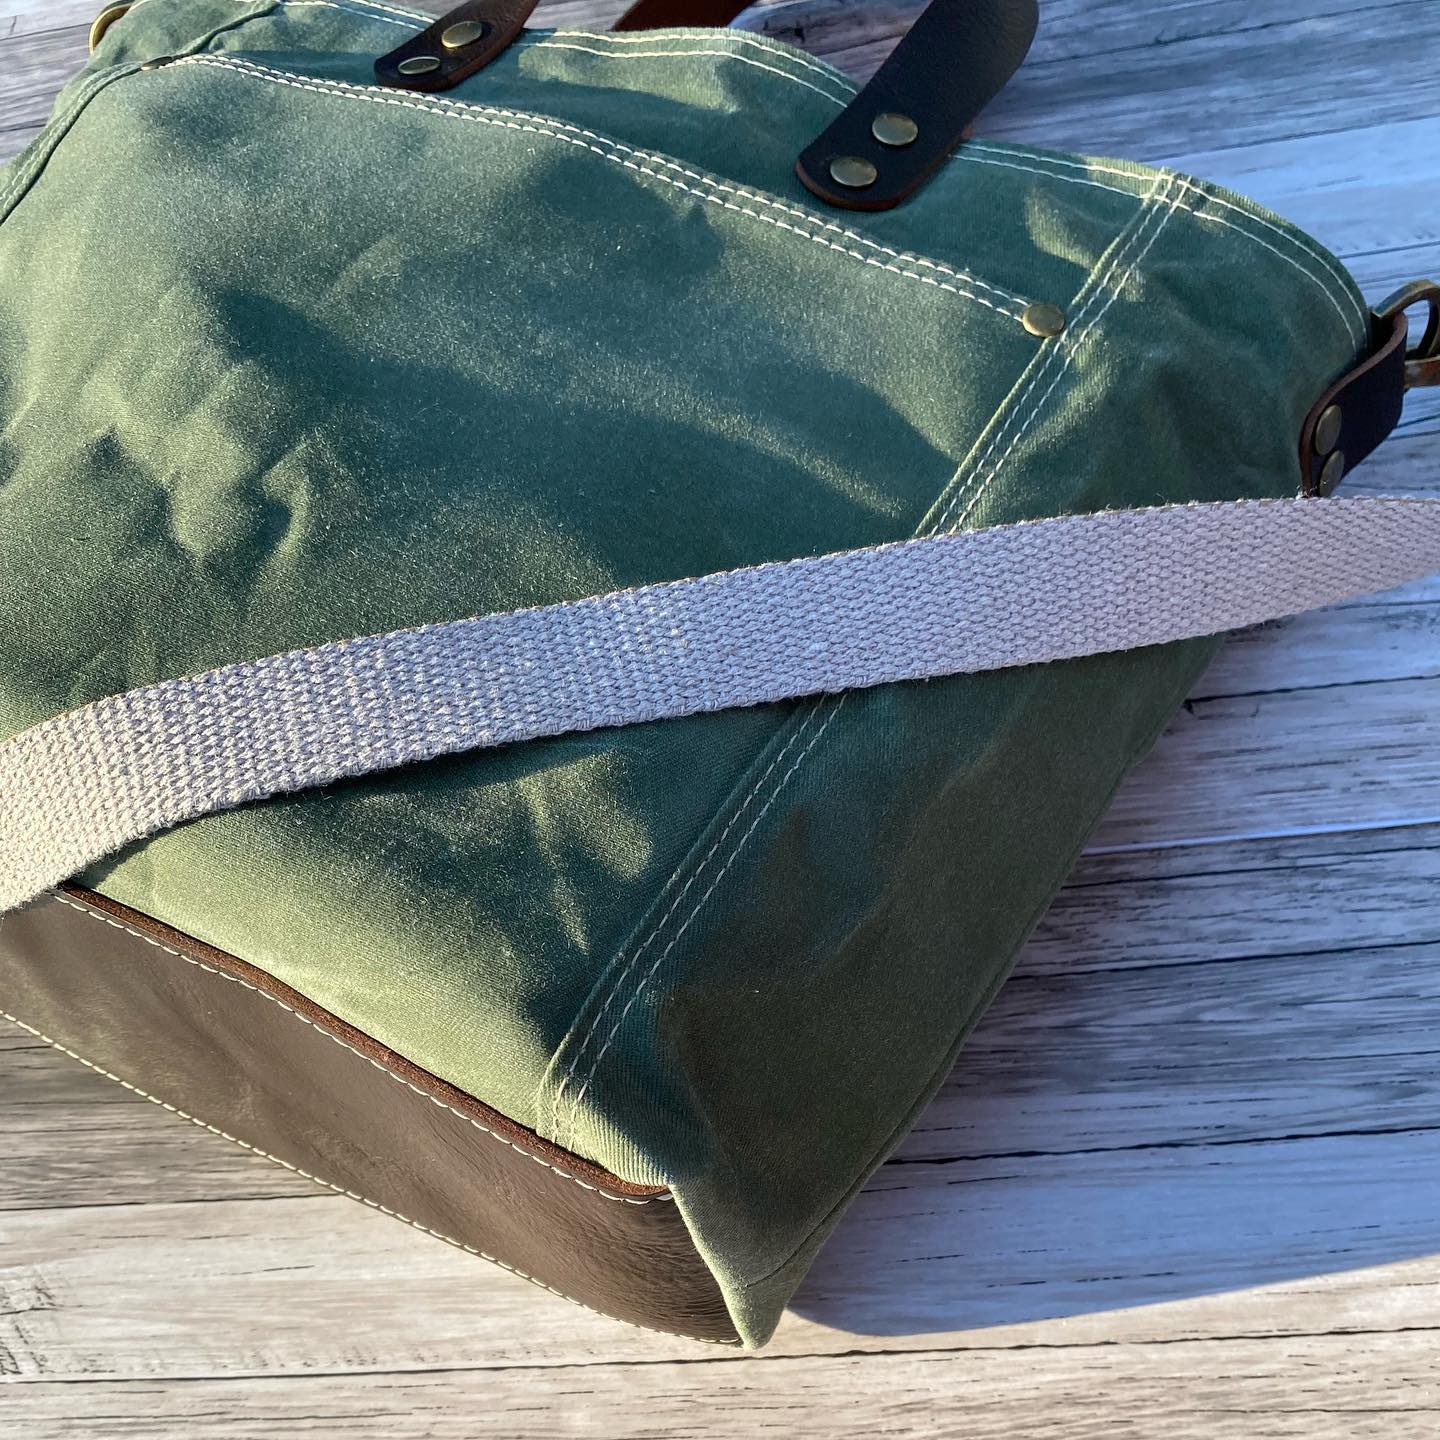 Sage Green Bees Waxed Canvas Oxford Tote with Black Leather handles and base with Natural heavy weight cotton strap Antique Brass hardware SquiresCanvasCreations